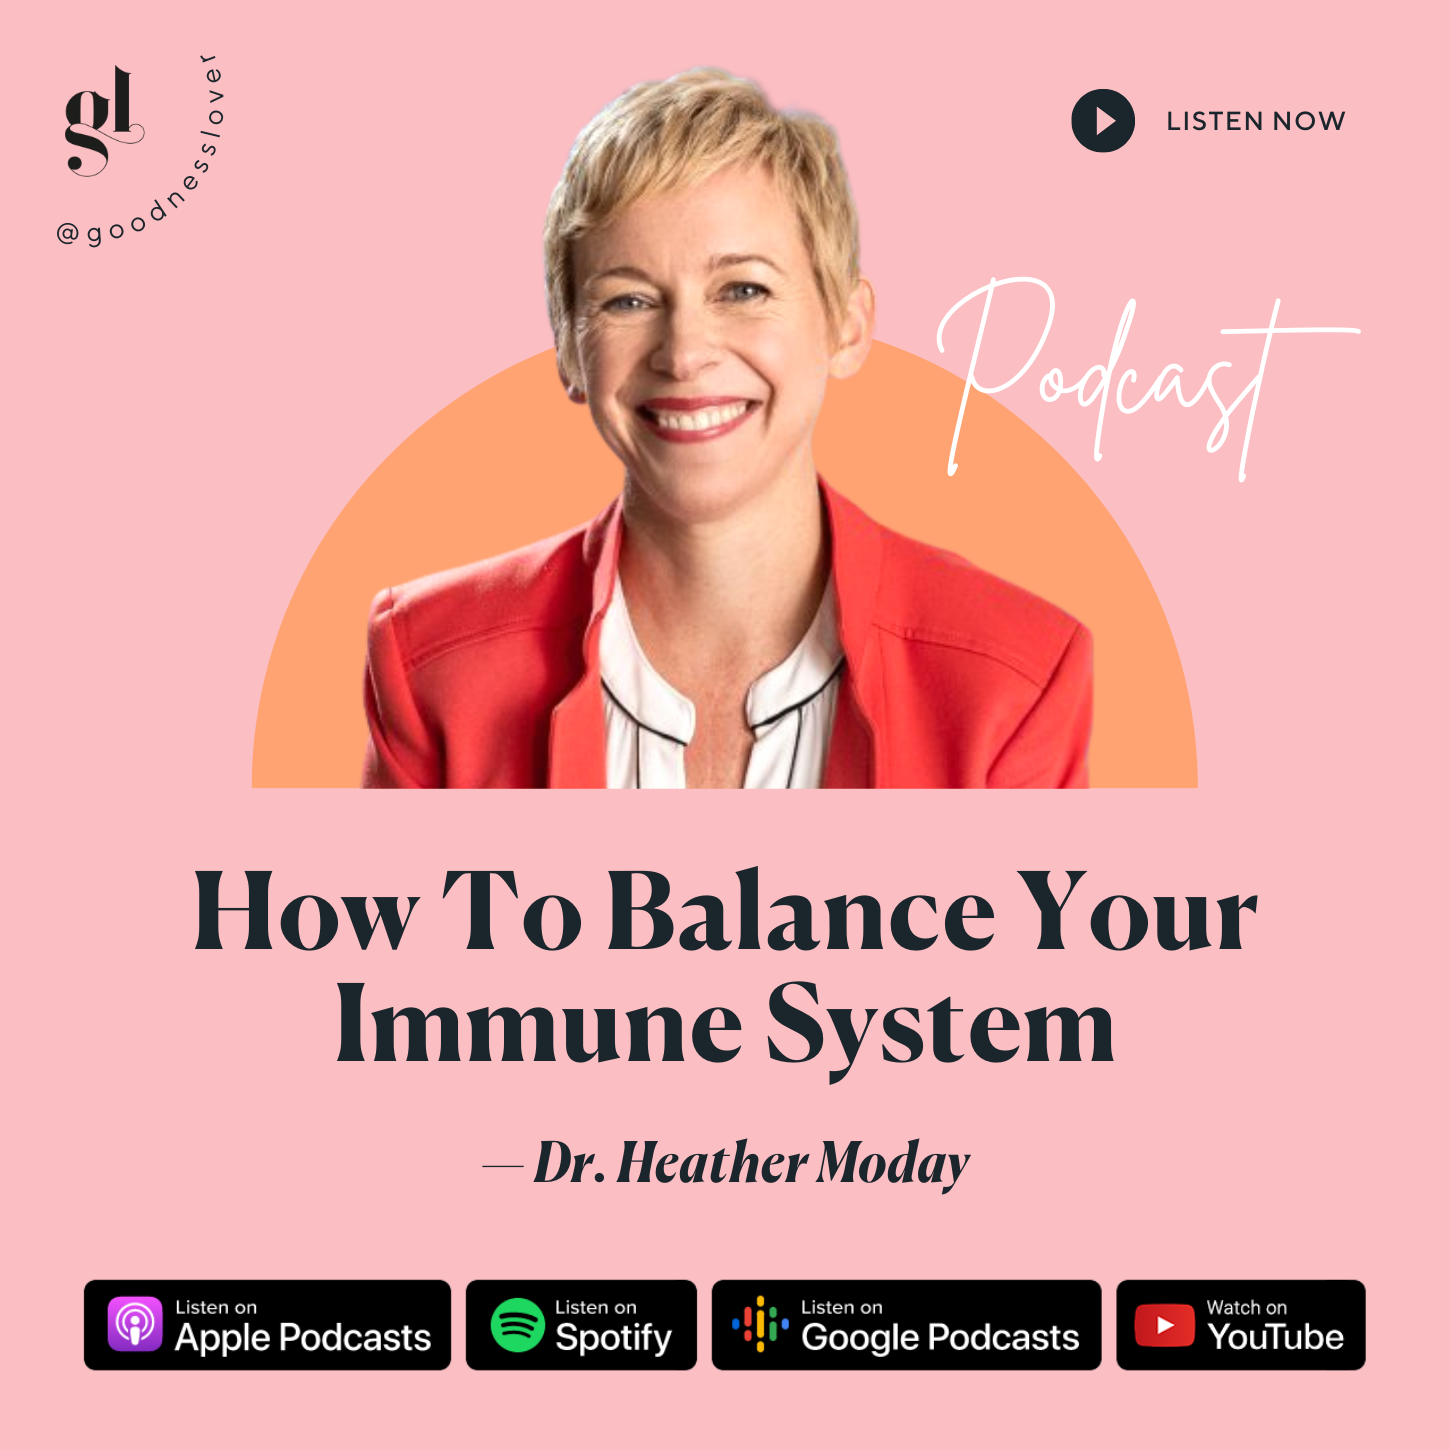 How To Care For Your Immune System | Dr. Heather Moday